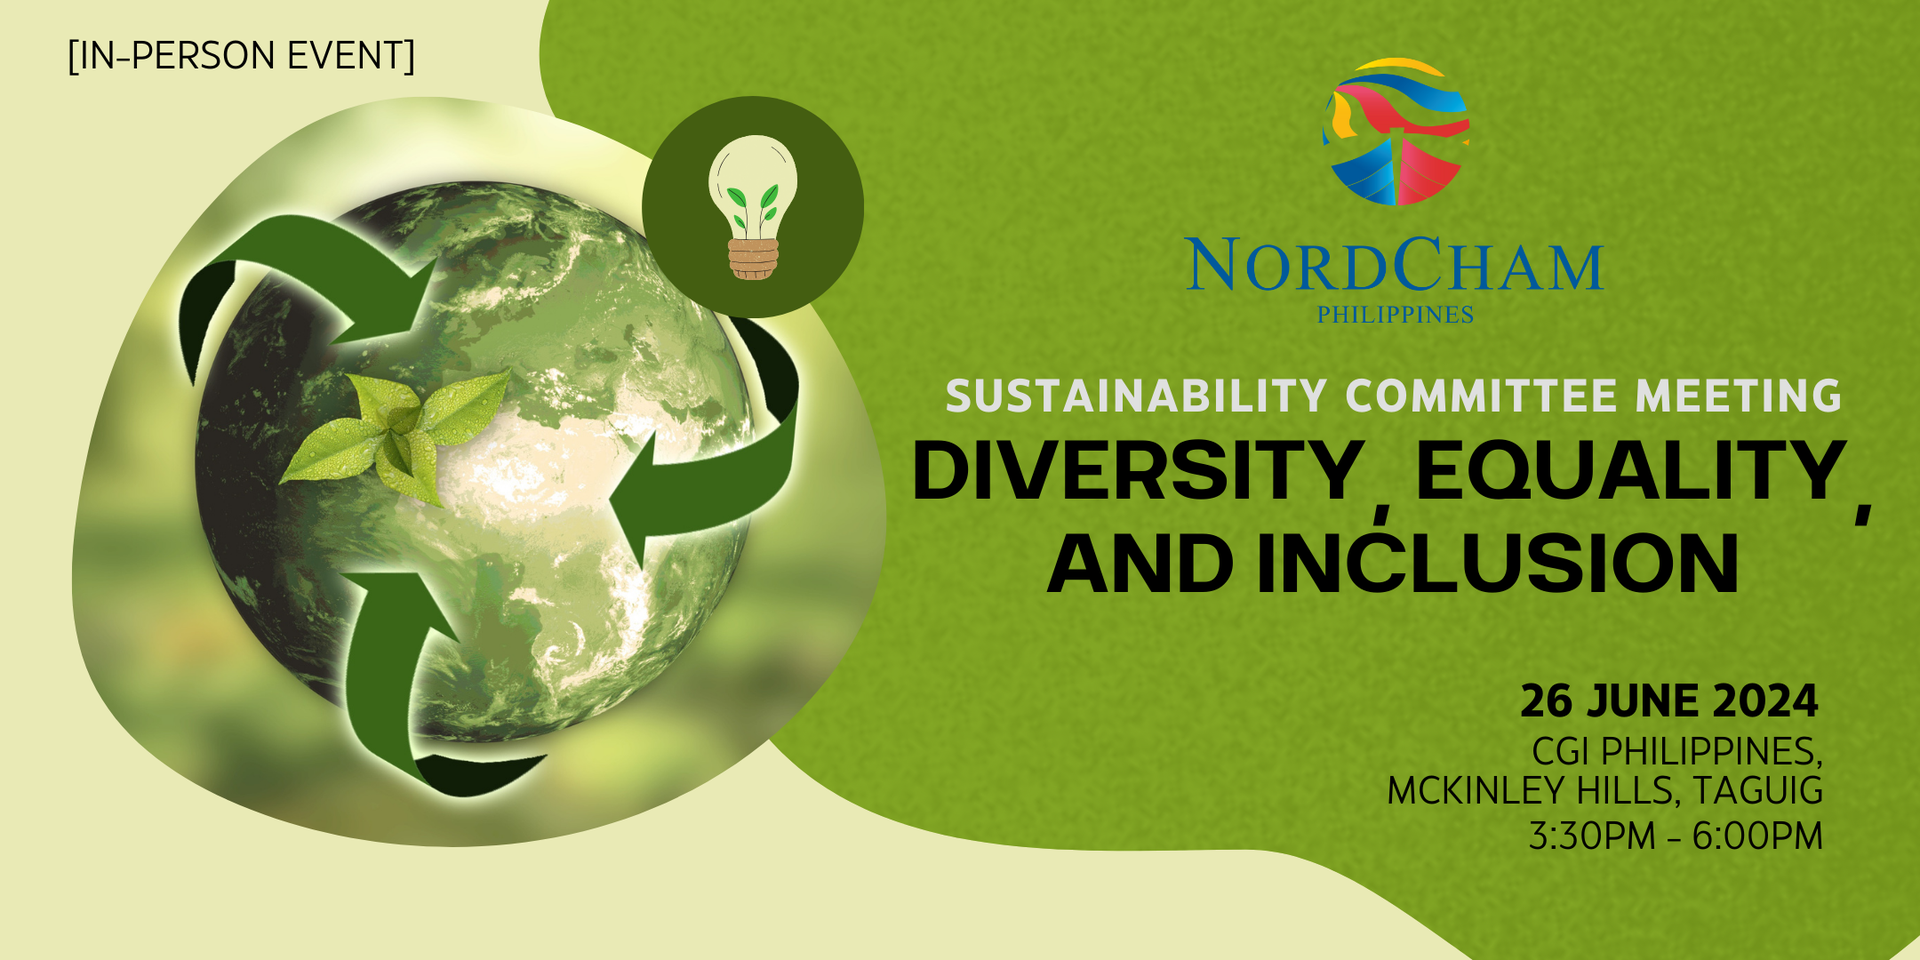 thumbnails SUSTAINABILITY COMMITTEE MEETING: DIVERSITY, EQUALITY, AND INCLUSION | 26 JUNE 2024 | CGI PHILIPPINES, MCKINLEY HILLS